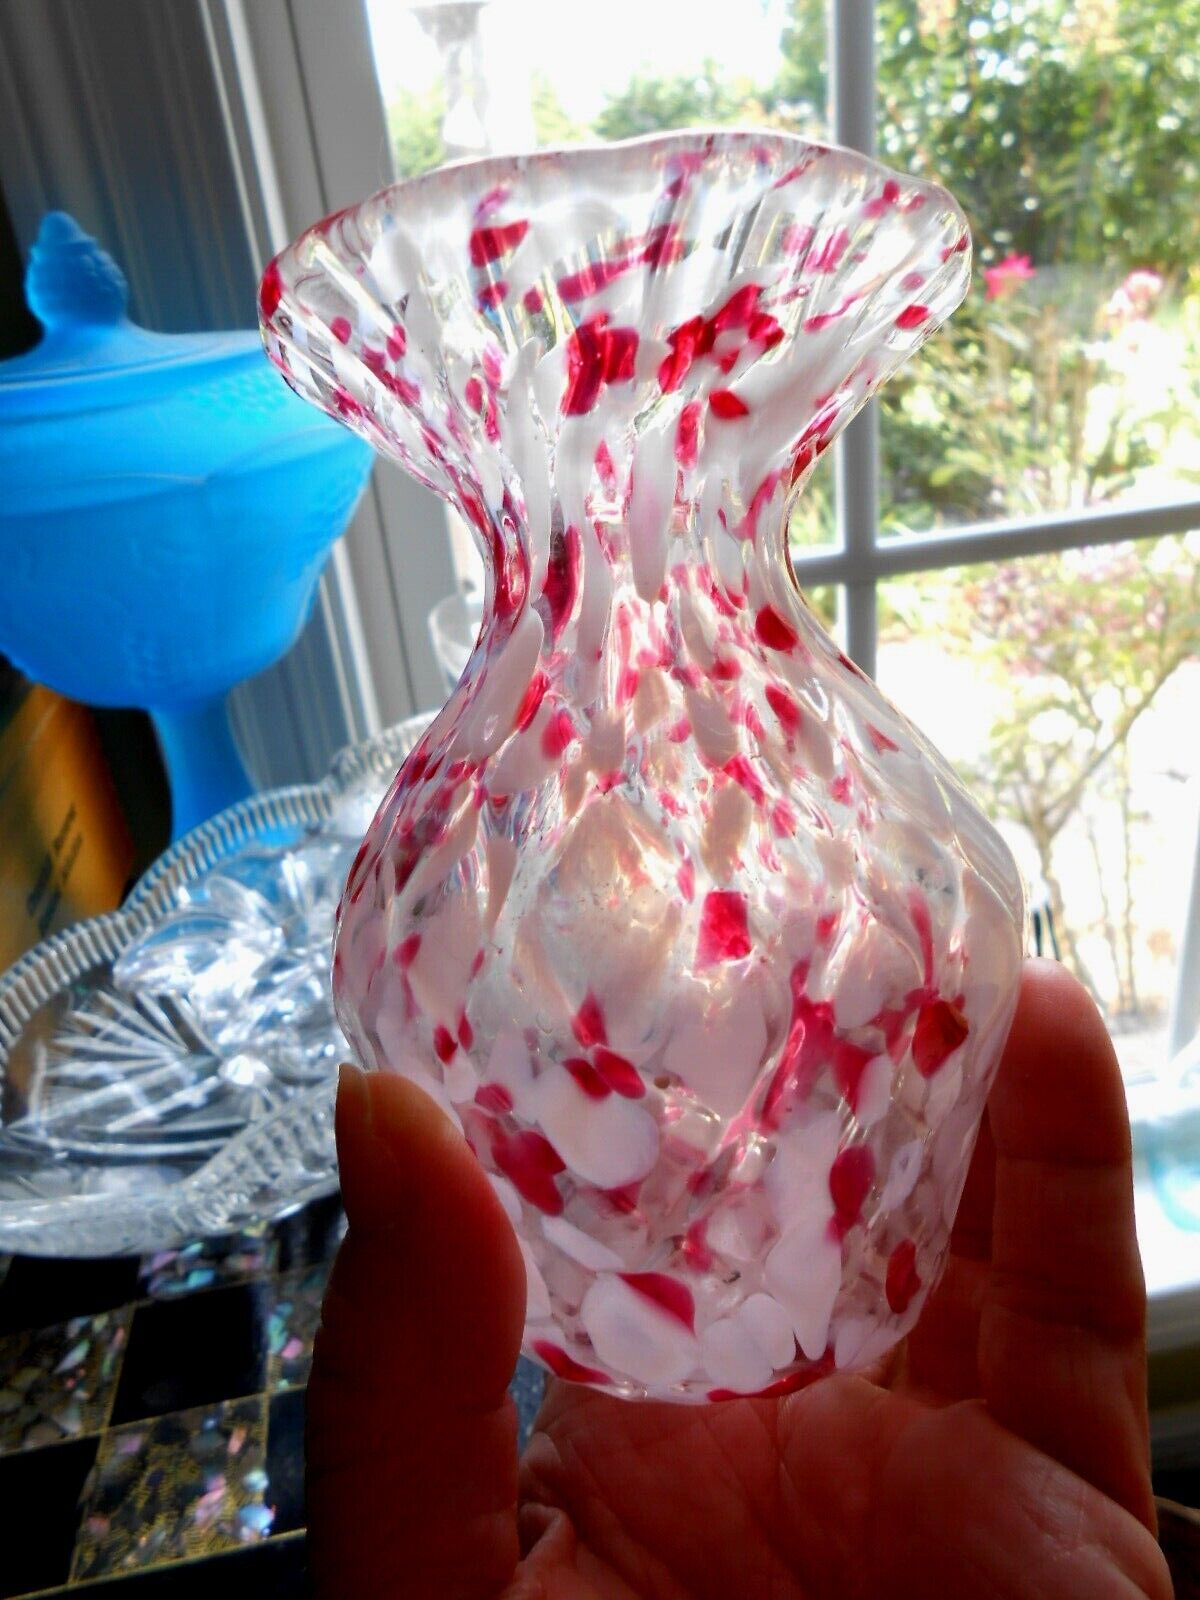 Clichy Glass Vase Cranberry Pink Fish Scale Confetti Swirl Mottled c. 1930s